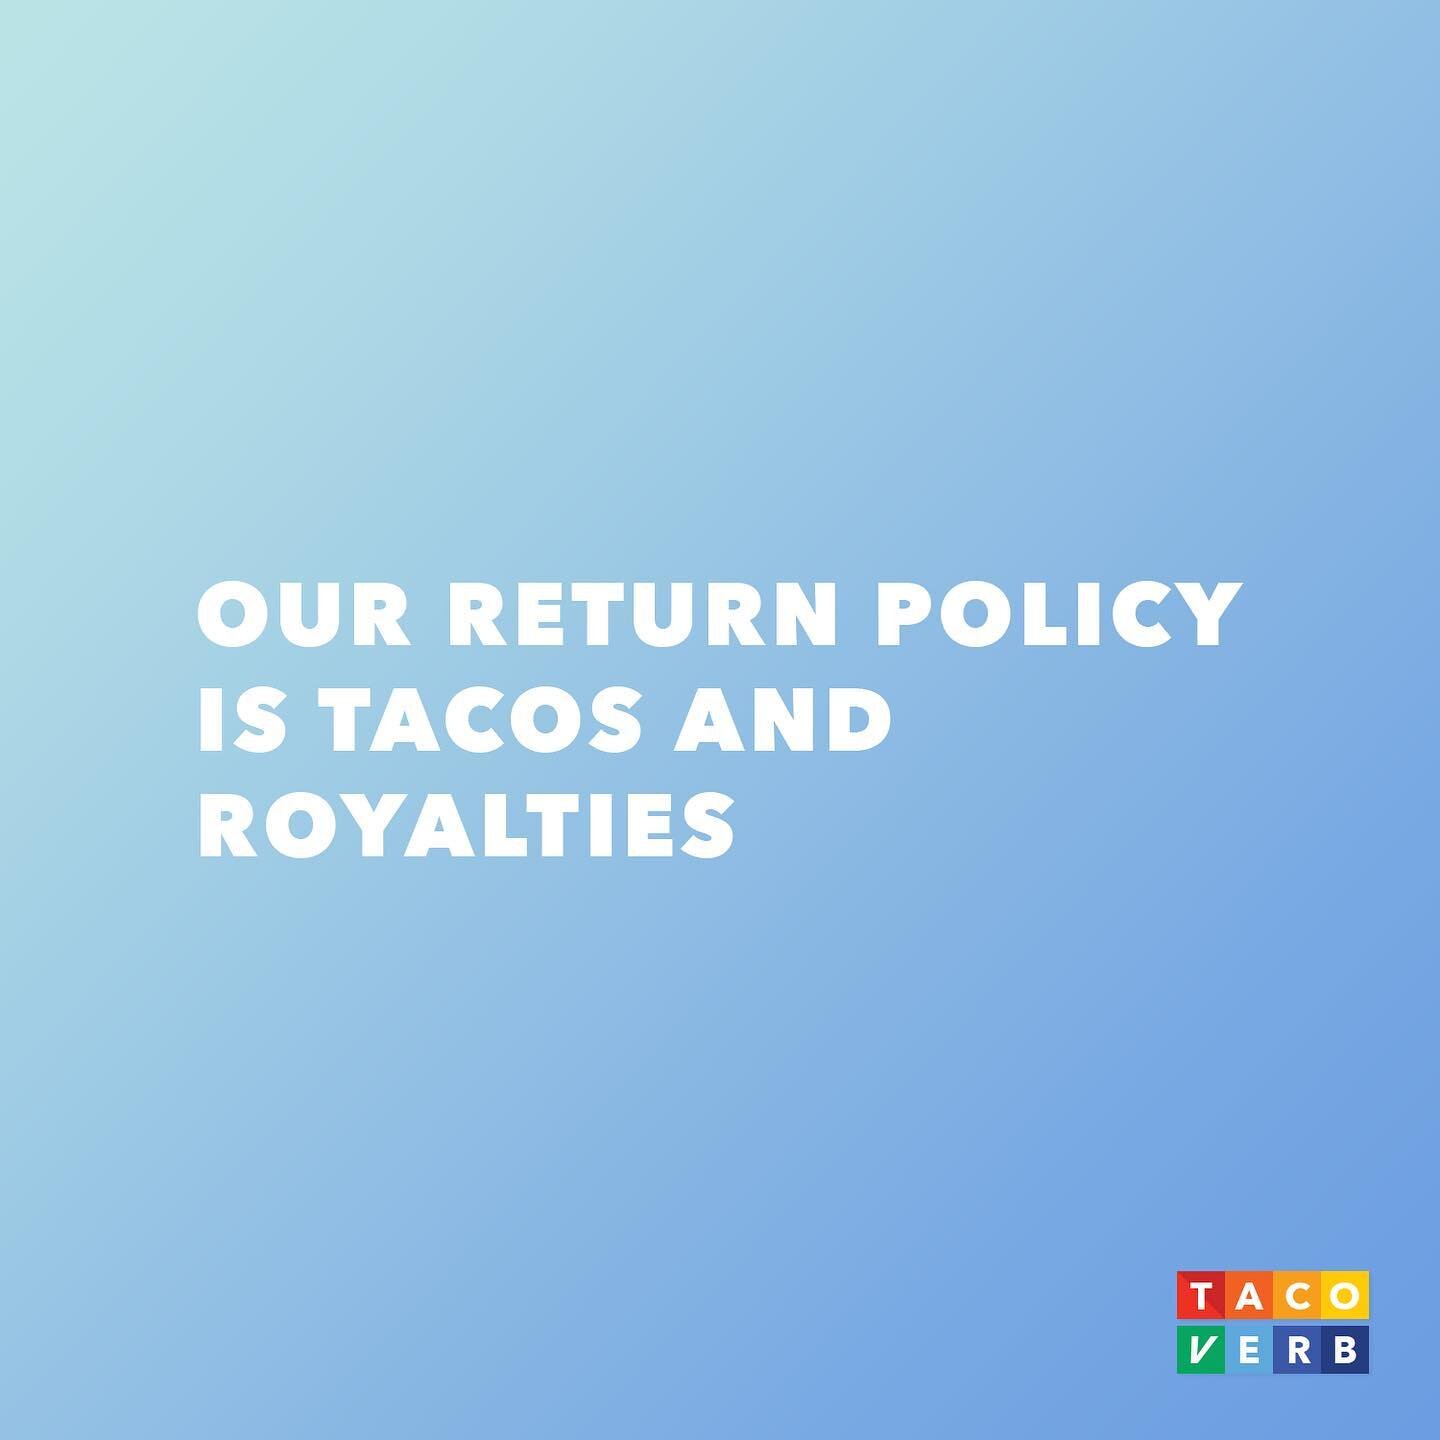 Warning ⚠️ This may turn you on. 

#nftcommunity #comingsoon #pieces #nft #tacos #tacotuesday